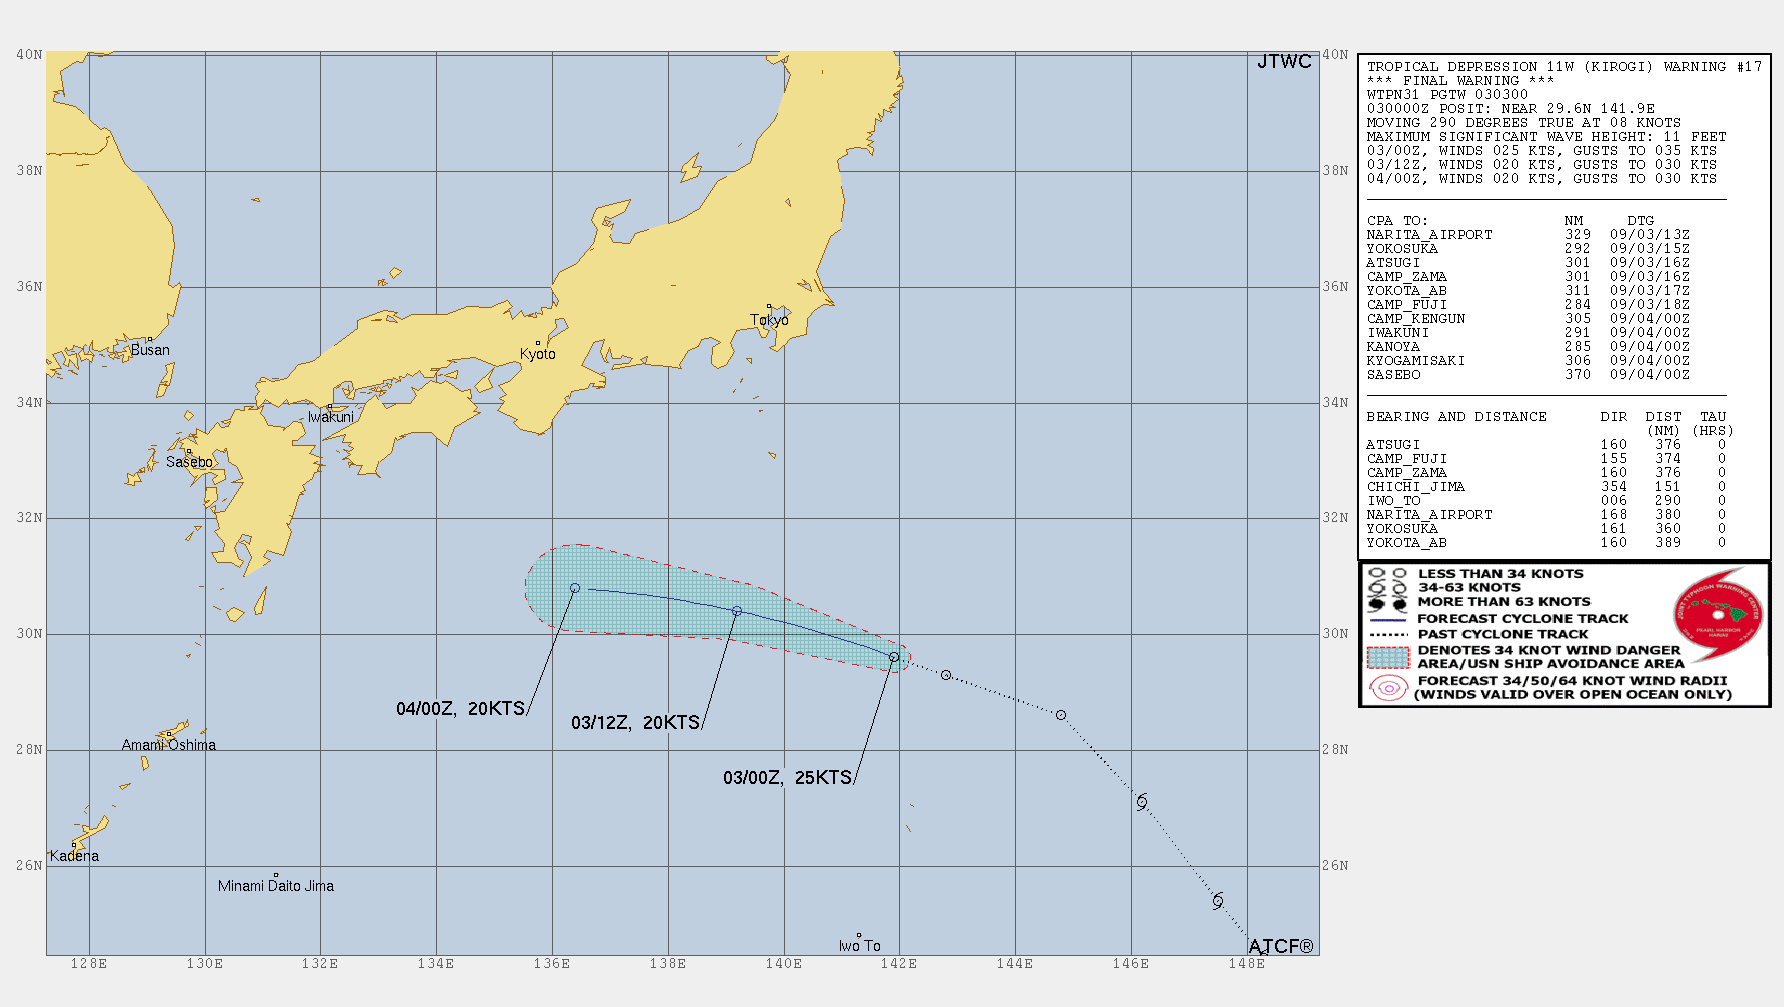 030300Z POSITION NEAR 29.8N 141.2E. 03SEP23. TROPICAL DEPRESSION (TD) 11W (KIROGI), LOCATED APPROXIMATELY 659 NM EAST-SOUTHEAST OF SASEBO, JAPAN, HAS TRACKED WEST- NORTHWESTWARD AT 08 KNOTS OVER THE PAST SIX HOURS. ANIMATED  MULTISPECTRAL SATELLITE IMAGERY DEPICTS A FULLY EXPOSED SHALLOW  CIRCULATION CENTER WITH BRISK UPPER LEVEL DIFFLUENT WINDS PROVIDING  AMPLE VERTICAL WIND SHEAR AND FANNING ISOLATED THUNDERSTORM ACTIVITY  TO THE NORTHWEST. THE LATEST SUBJECTIVE INTENSITY ESTIMATES RANGE FROM  TOO WEAK (KNES) TO T2.0 (RJTD). A 022025Z SMAP PARTIAL PASS AND  021840Z HY-2C PASS TOPPED OUT AT 28 KNOTS. WHILE A FEW CONVECTIVE  POCKETS IN THE PERIPHERY MAY HAVE SOME HIGHER WINDS ASSOCIATED, THESE  ARE LIKELY OUTSIDE OF THE ANALYZED 145 NM RADIUS OF OUTERMOST CLOSED  ISOBAR. TD KIROGI SHOULD CONTINUE TRACKING WEST-NORTHWEST TO WESTWARD  AS IT DISSIPATES OVER WATER DUE TO STRONG (30 KNOT) VERTICAL WIND  SHEAR AND RELATIVELY LOW MID-LEVEL RELATIVE HUMIDITY CONDITIONS.  MINIMUM CENTRAL PRESSURE AT 90300Z IS 1002 MB.  THIS IS THE FINAL WARNING ON THIS SYSTEM BY THE JOINT TYPHOON WRNCEN PEARL HARBOR HI. THE SYSTEM WILL BE CLOSELY MONITORED FOR SIGNS OF REGENERATION.  MAXIMUM SIGNIFICANT WAVE HEIGHT AT 030000Z IS 11 FEET.